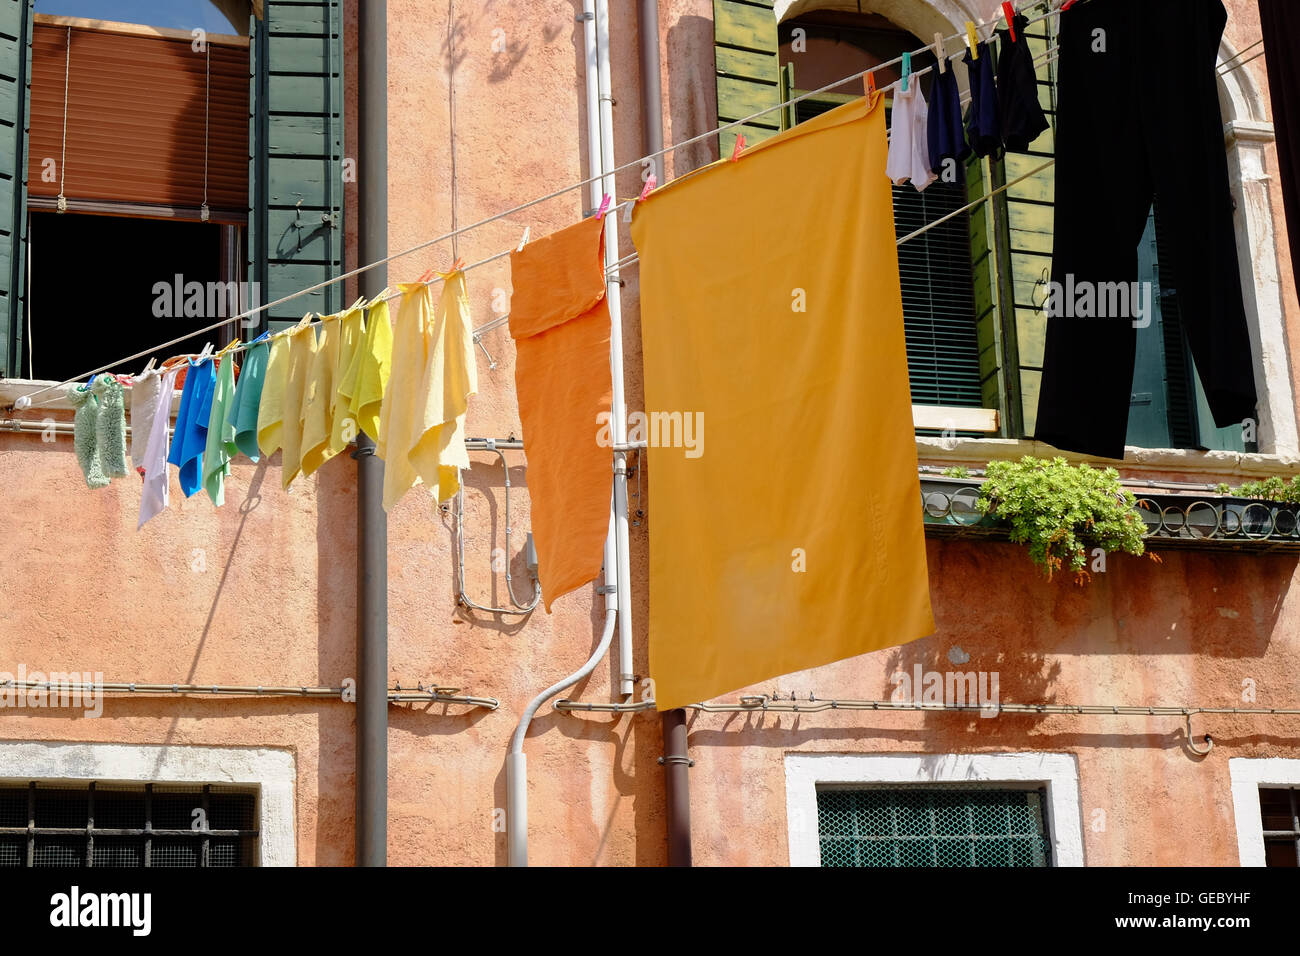 Colourful laundry hanging on a clothes line Venice Italy Stock Photo